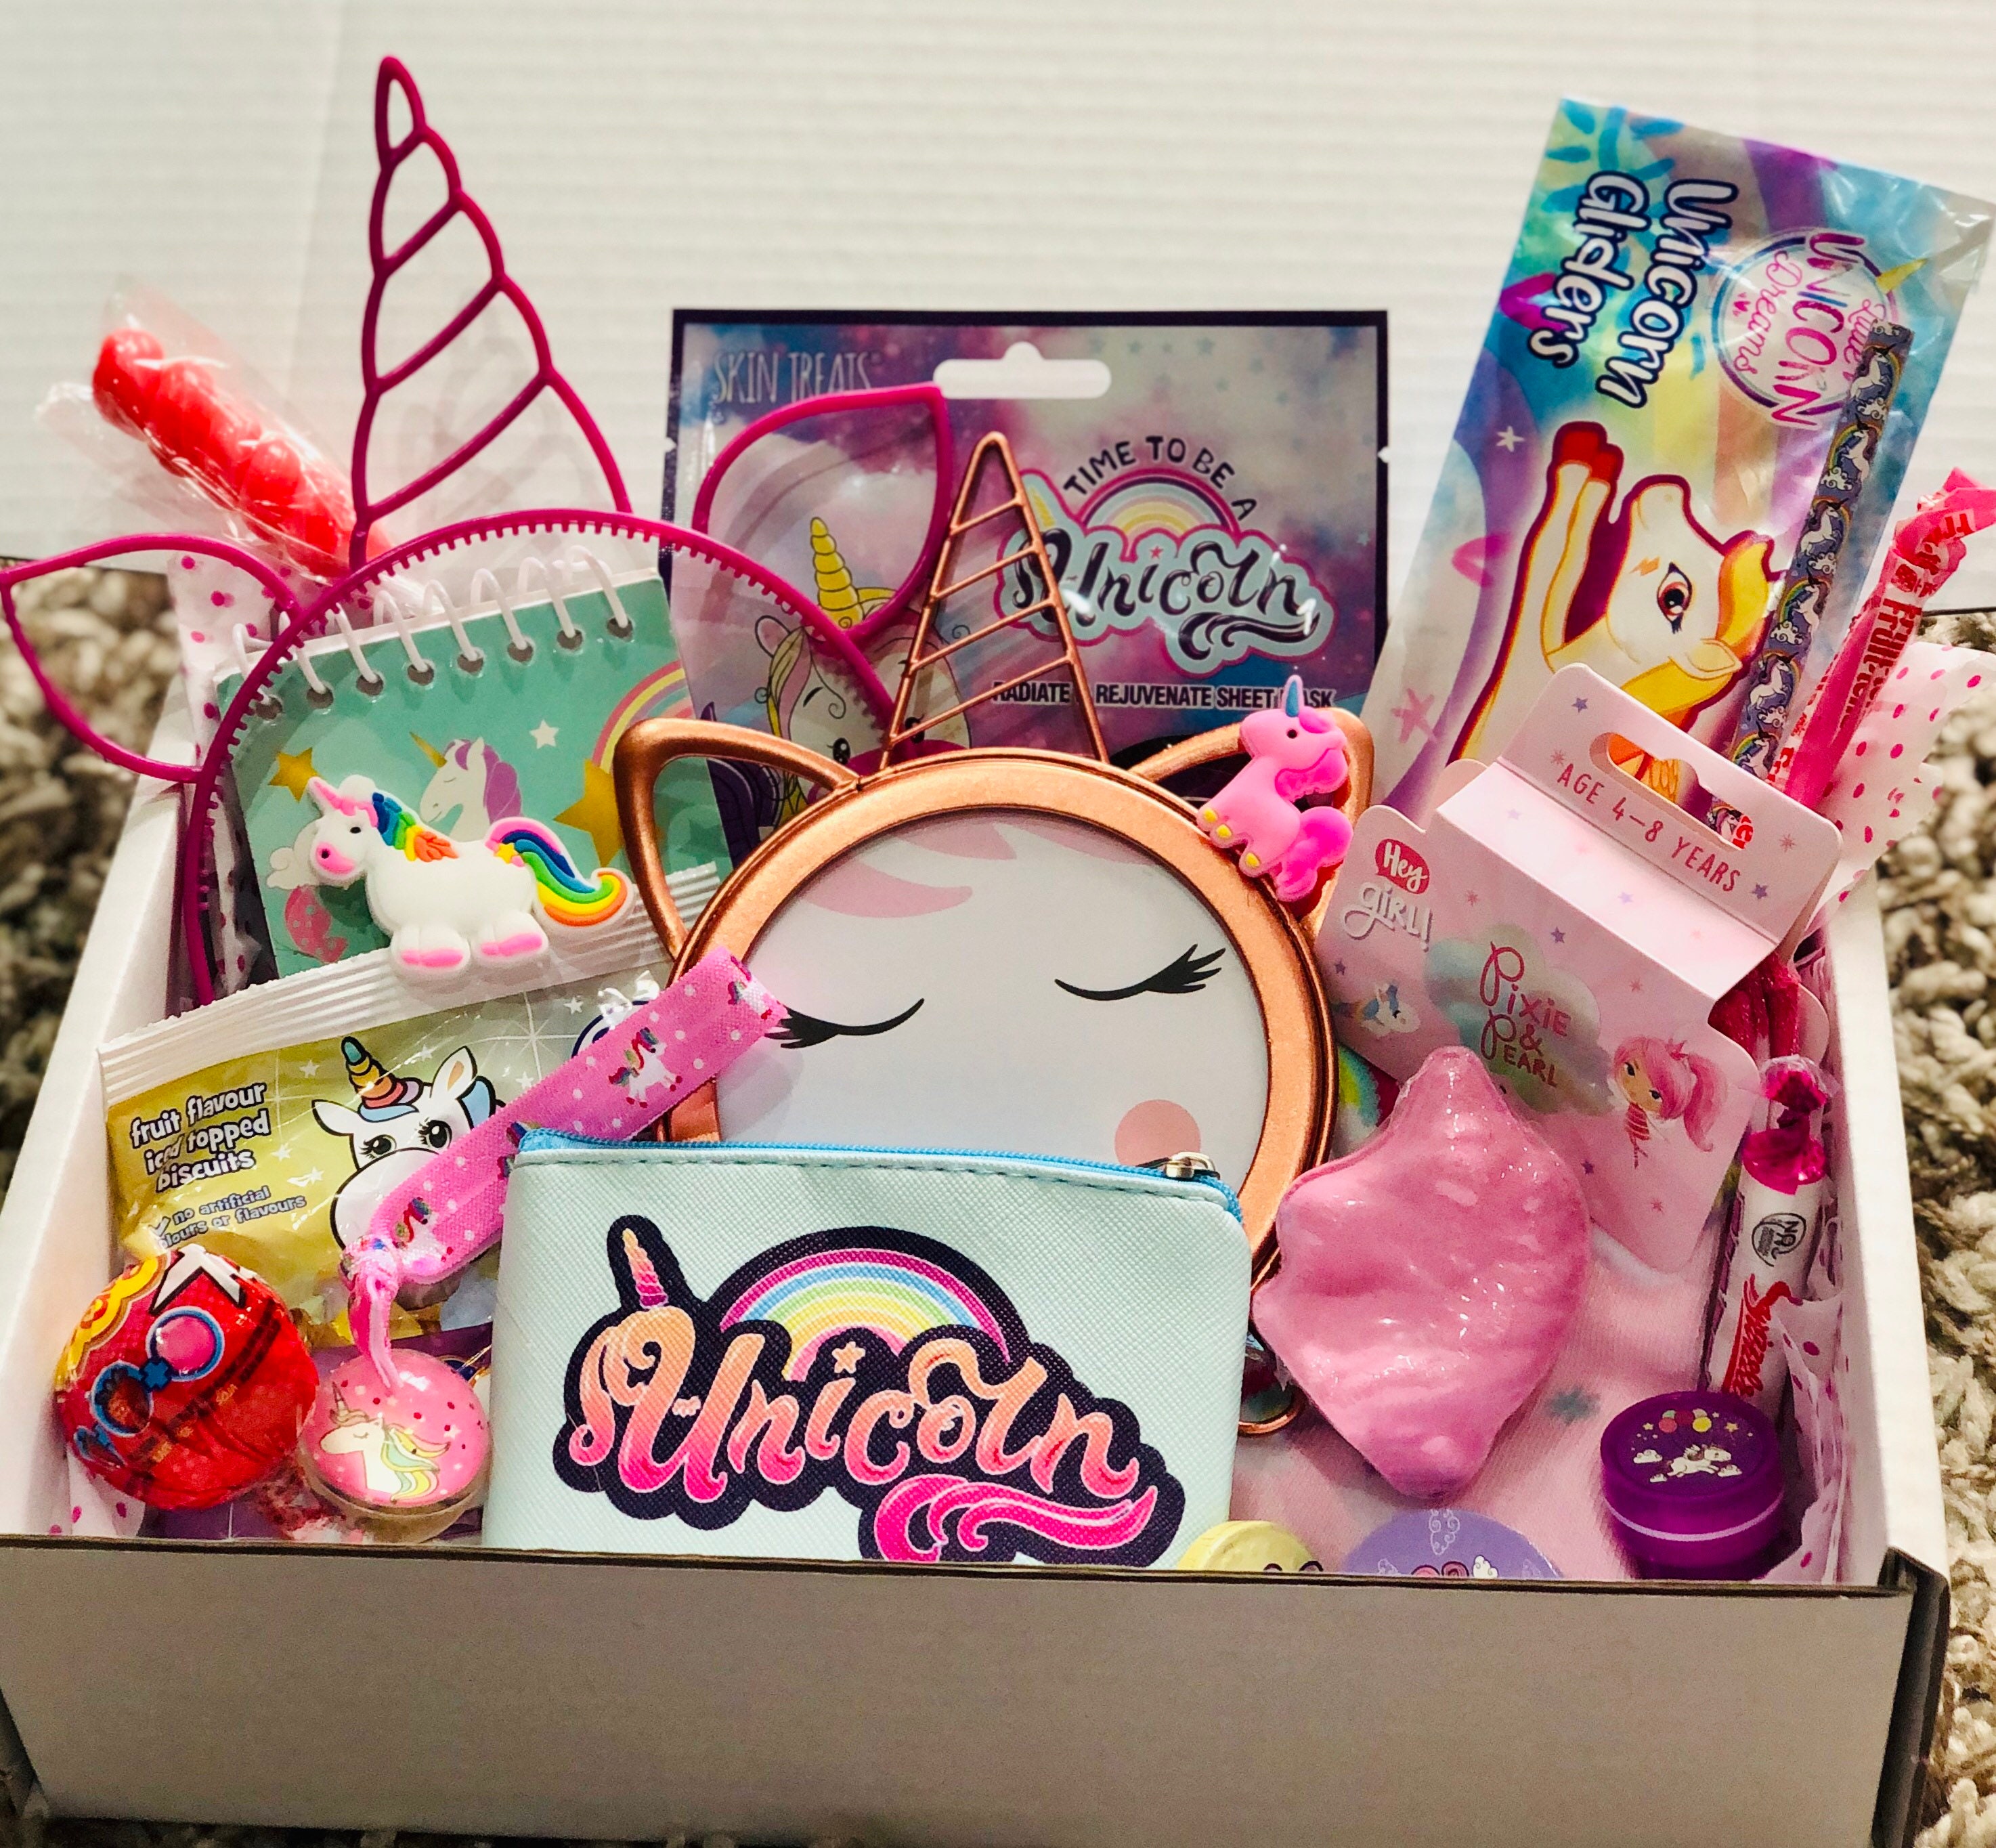 Unicorn Gifts for Girls Age 5 6 7 8 Years Old-Unicorn Surprise Box with  Plush Toy,Rainbow Scratch Paper,Bags-Little Girl Jewel Rings in Box-Girls